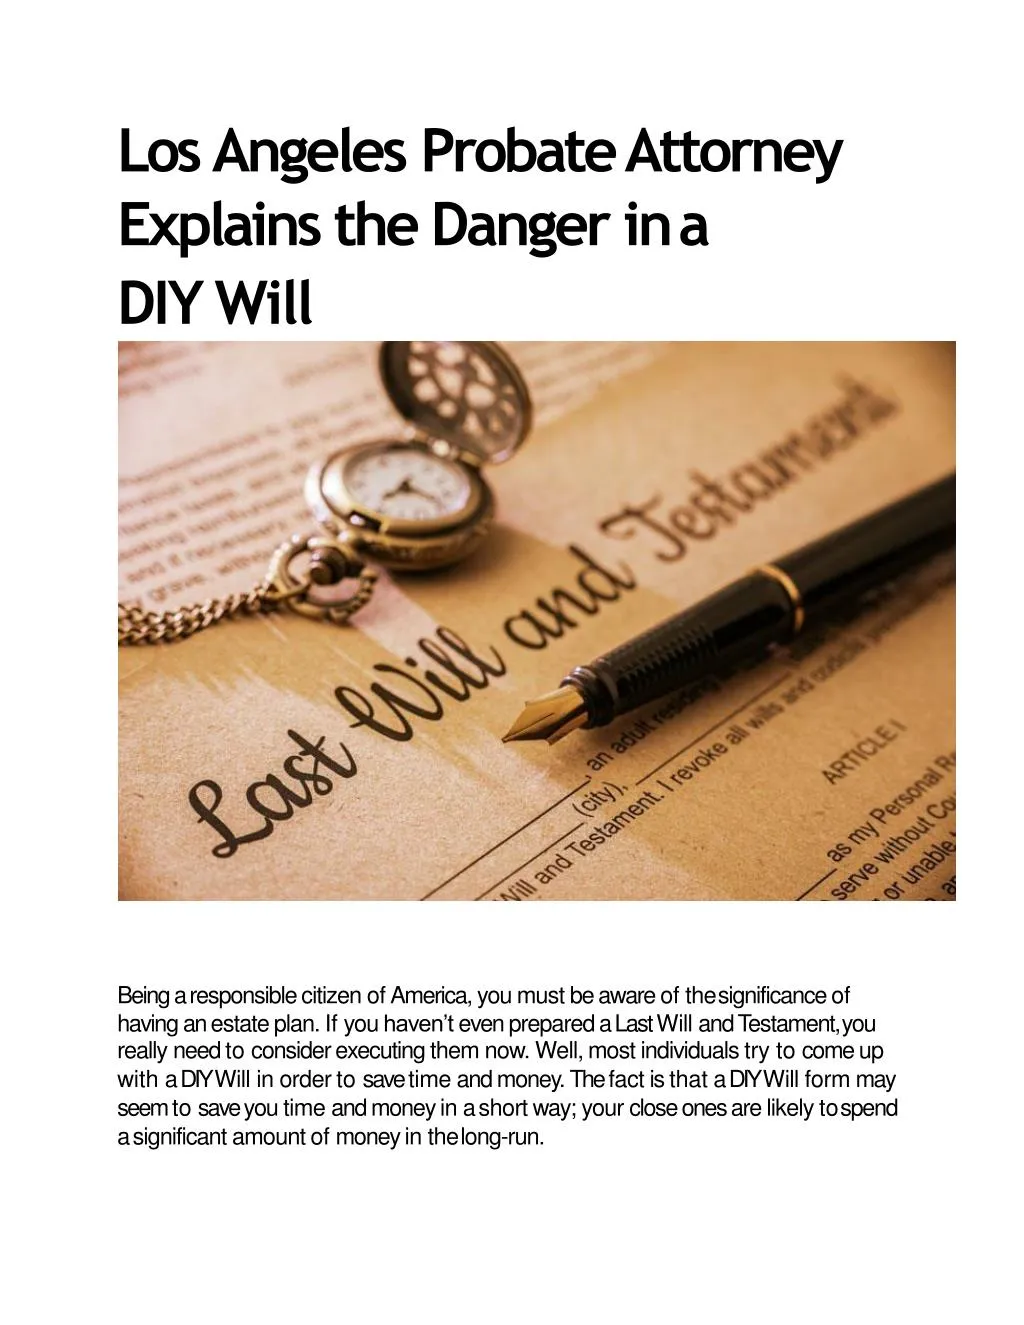 los angeles probate attorney explains the danger in a diy will